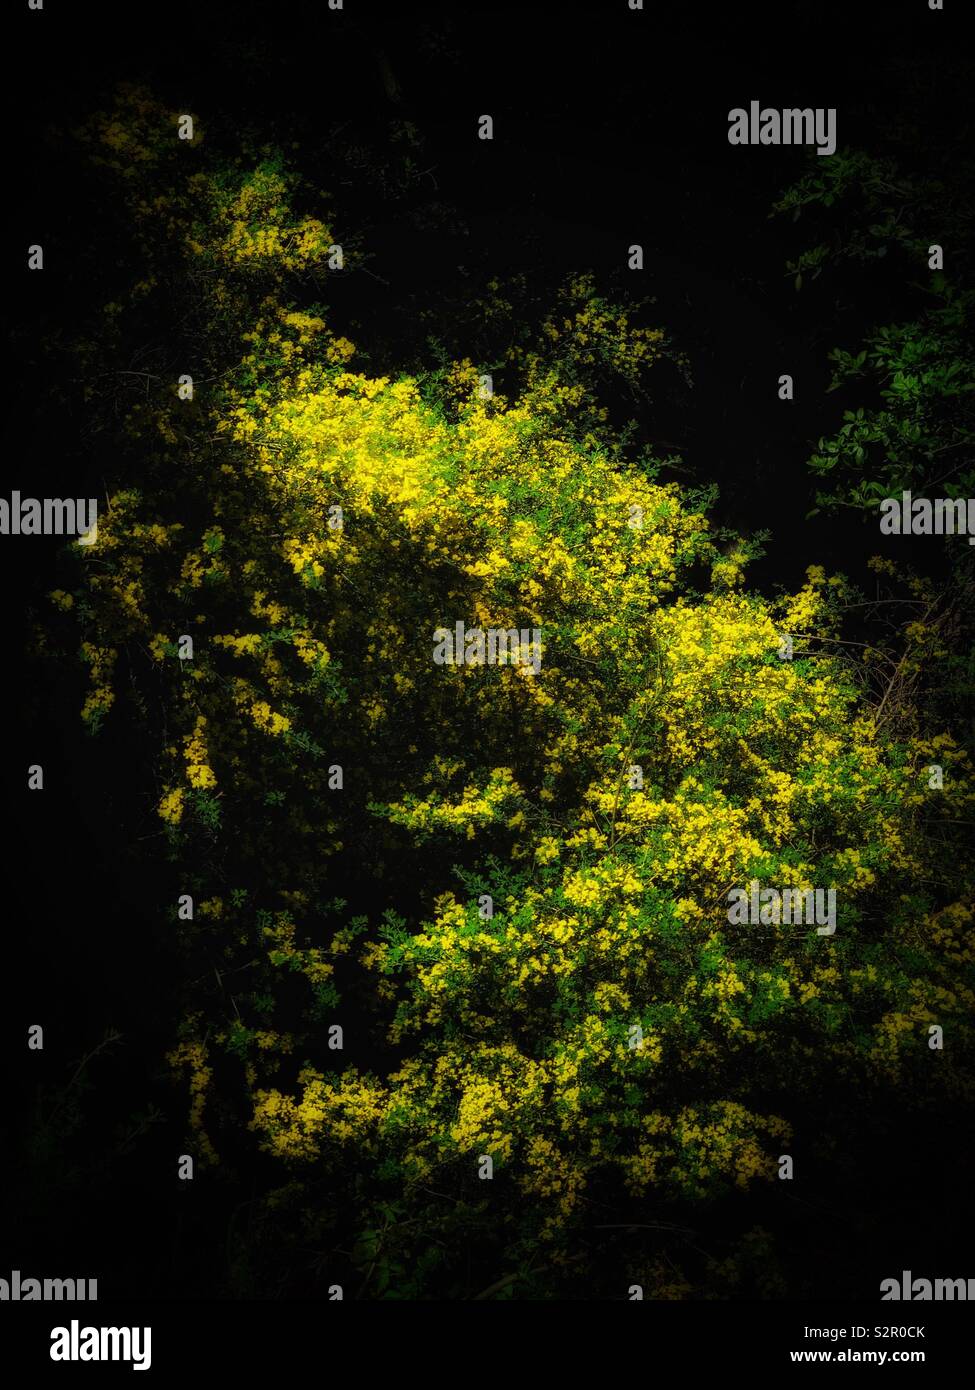 The yellowish Cassia corymbosa lighted up in the woods/ 傘房決明。 Stock Photo